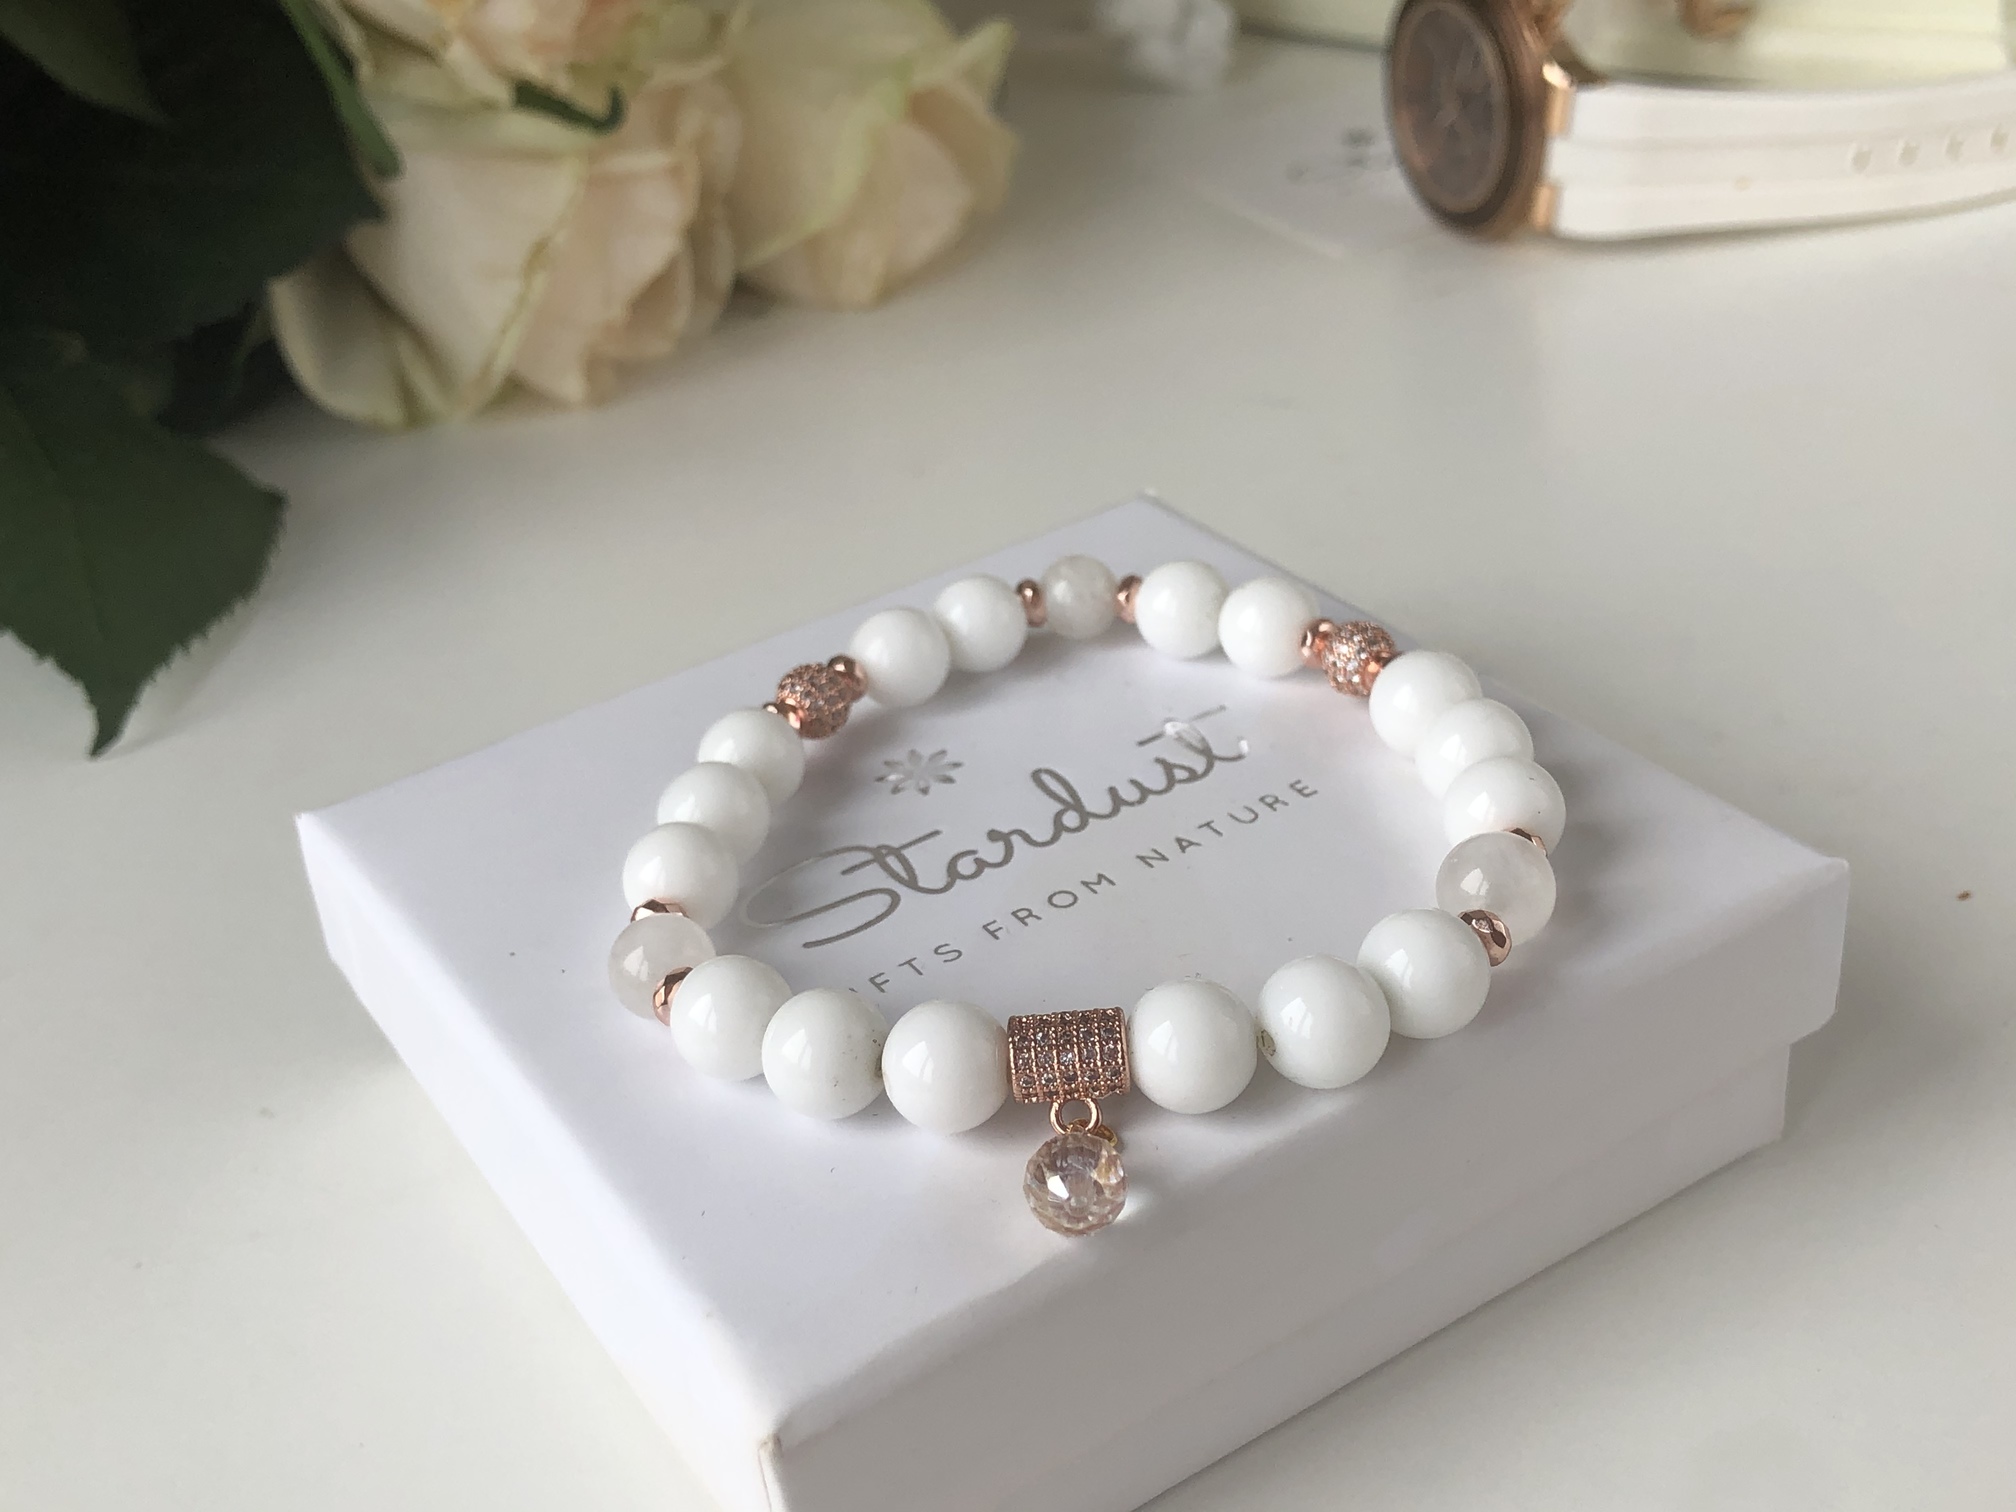 AeraVida White Purity Reconstructed Agate & Simulated Clear Quartz & Cultured Freshwater White Pearl Wrap Bracelet BS-0191-WML 